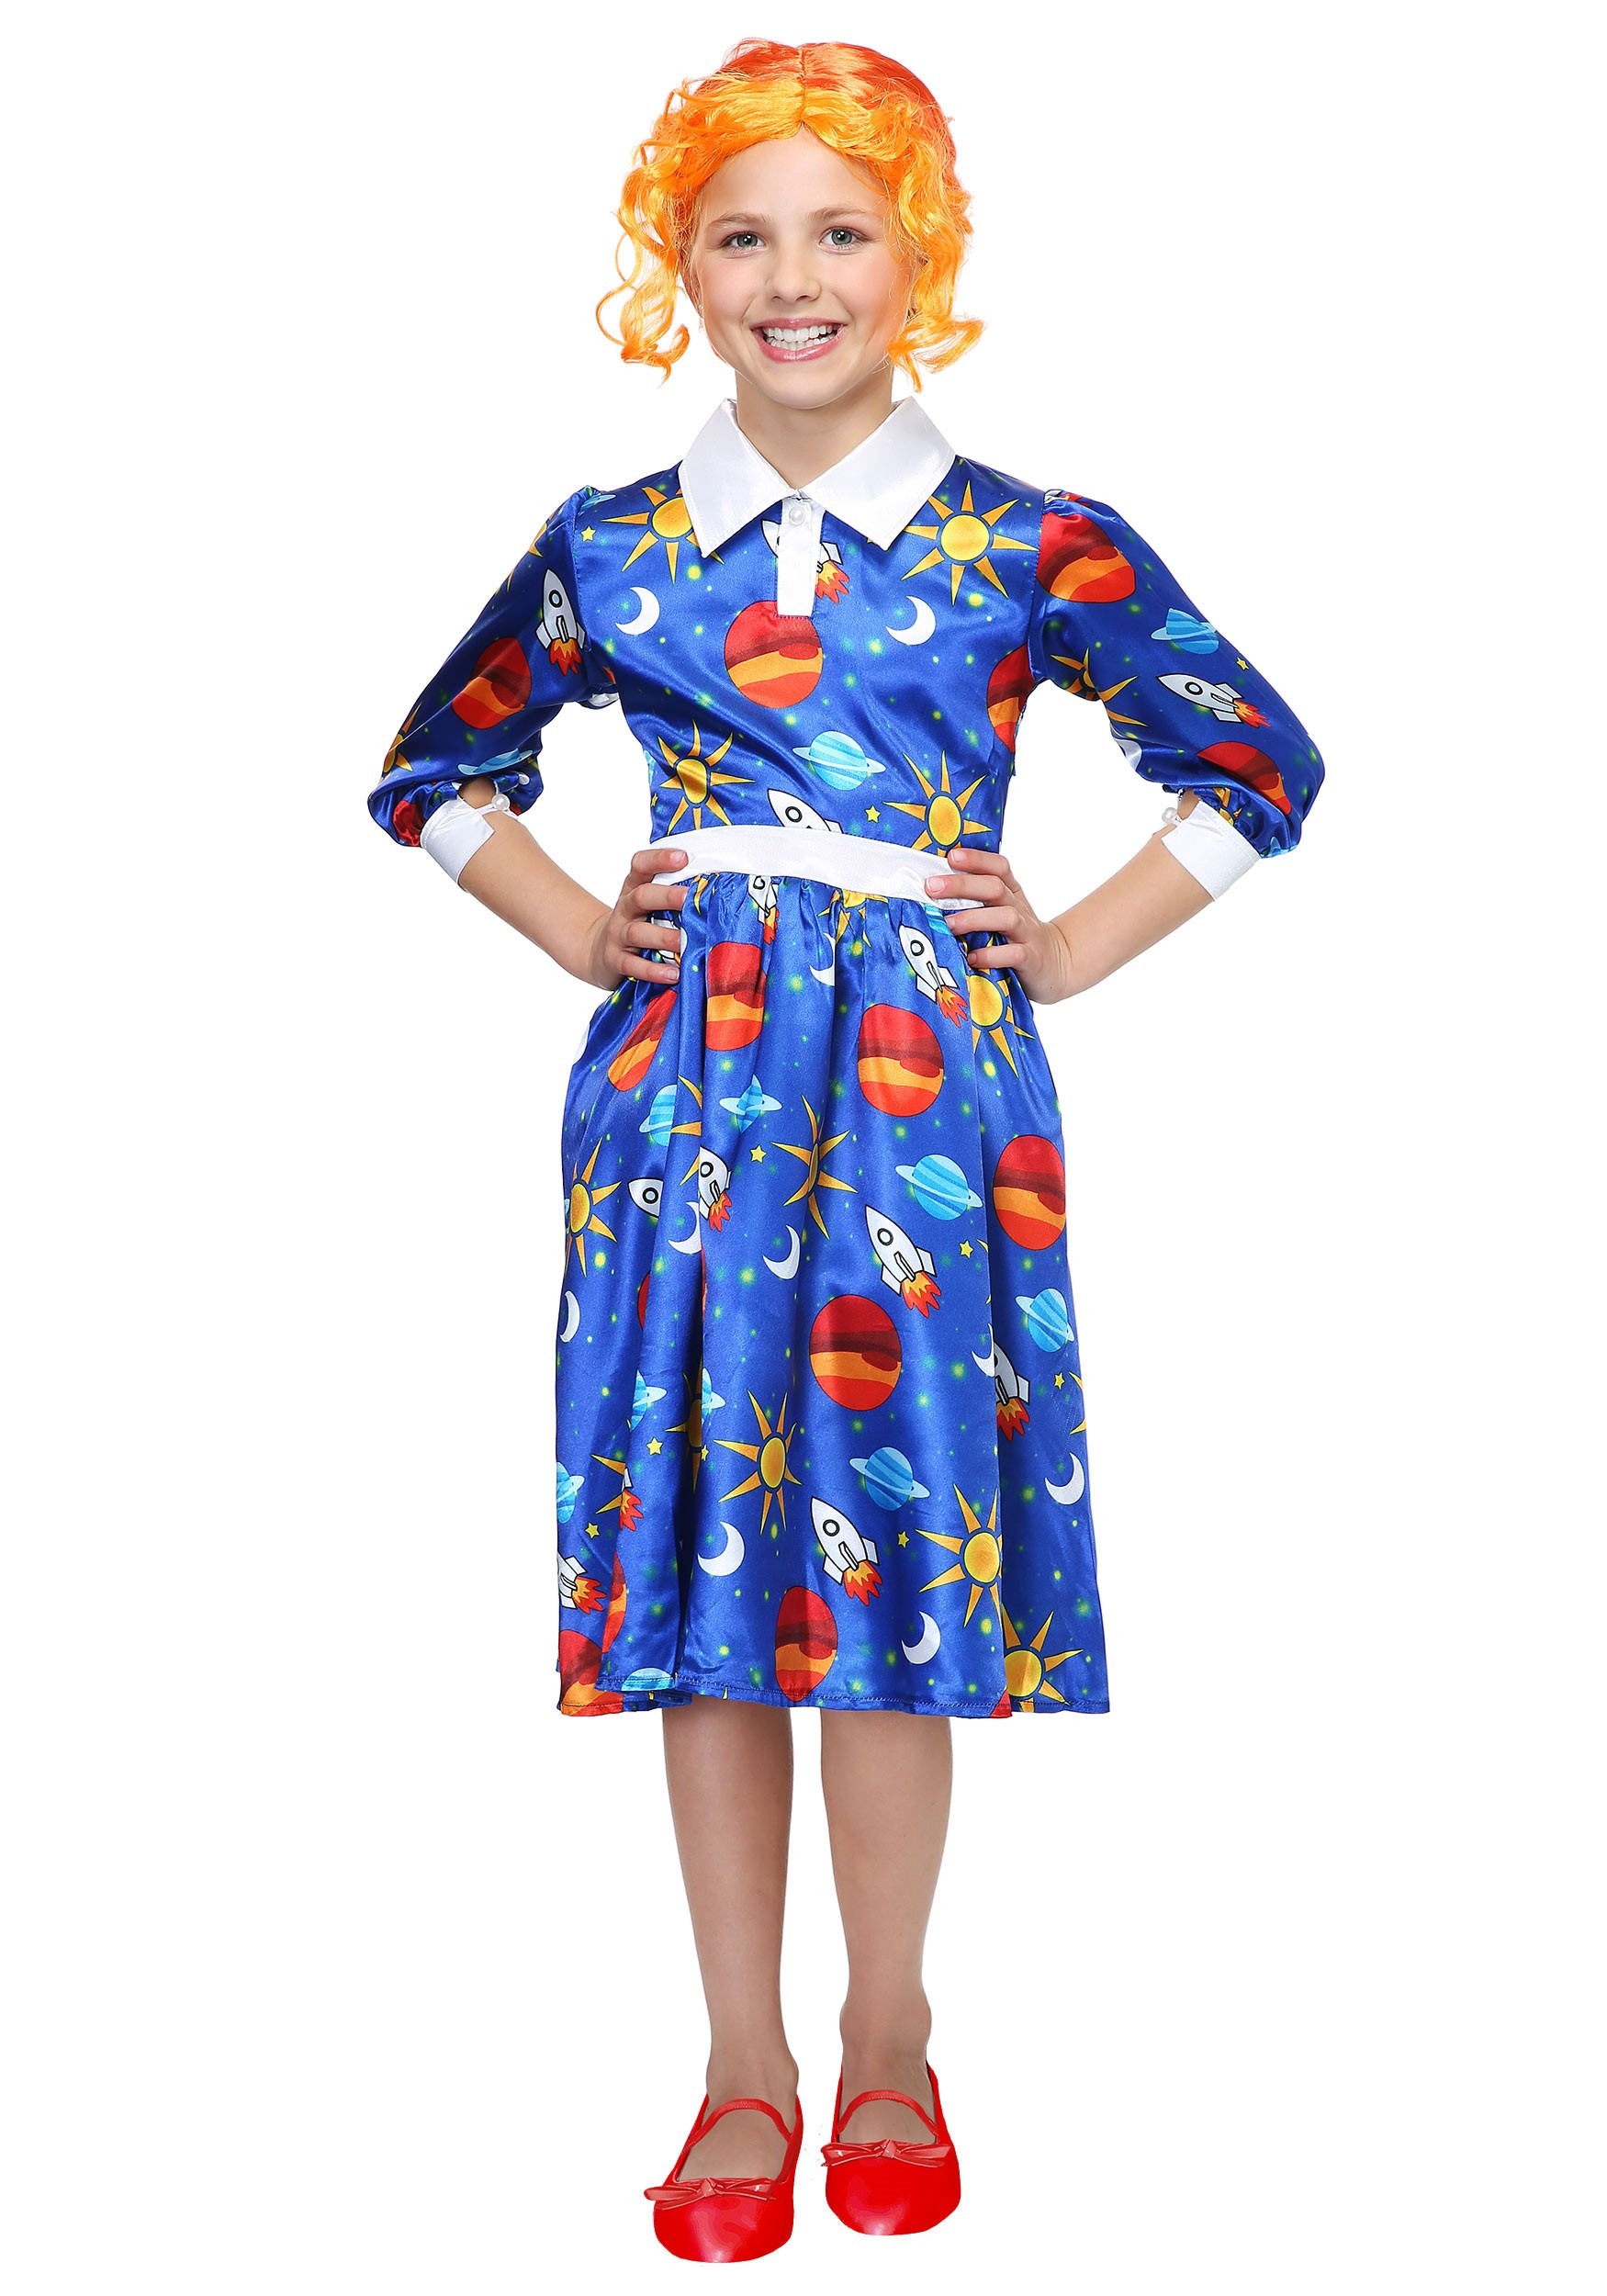 Magic School Bus Ms. Frizzle for Girls